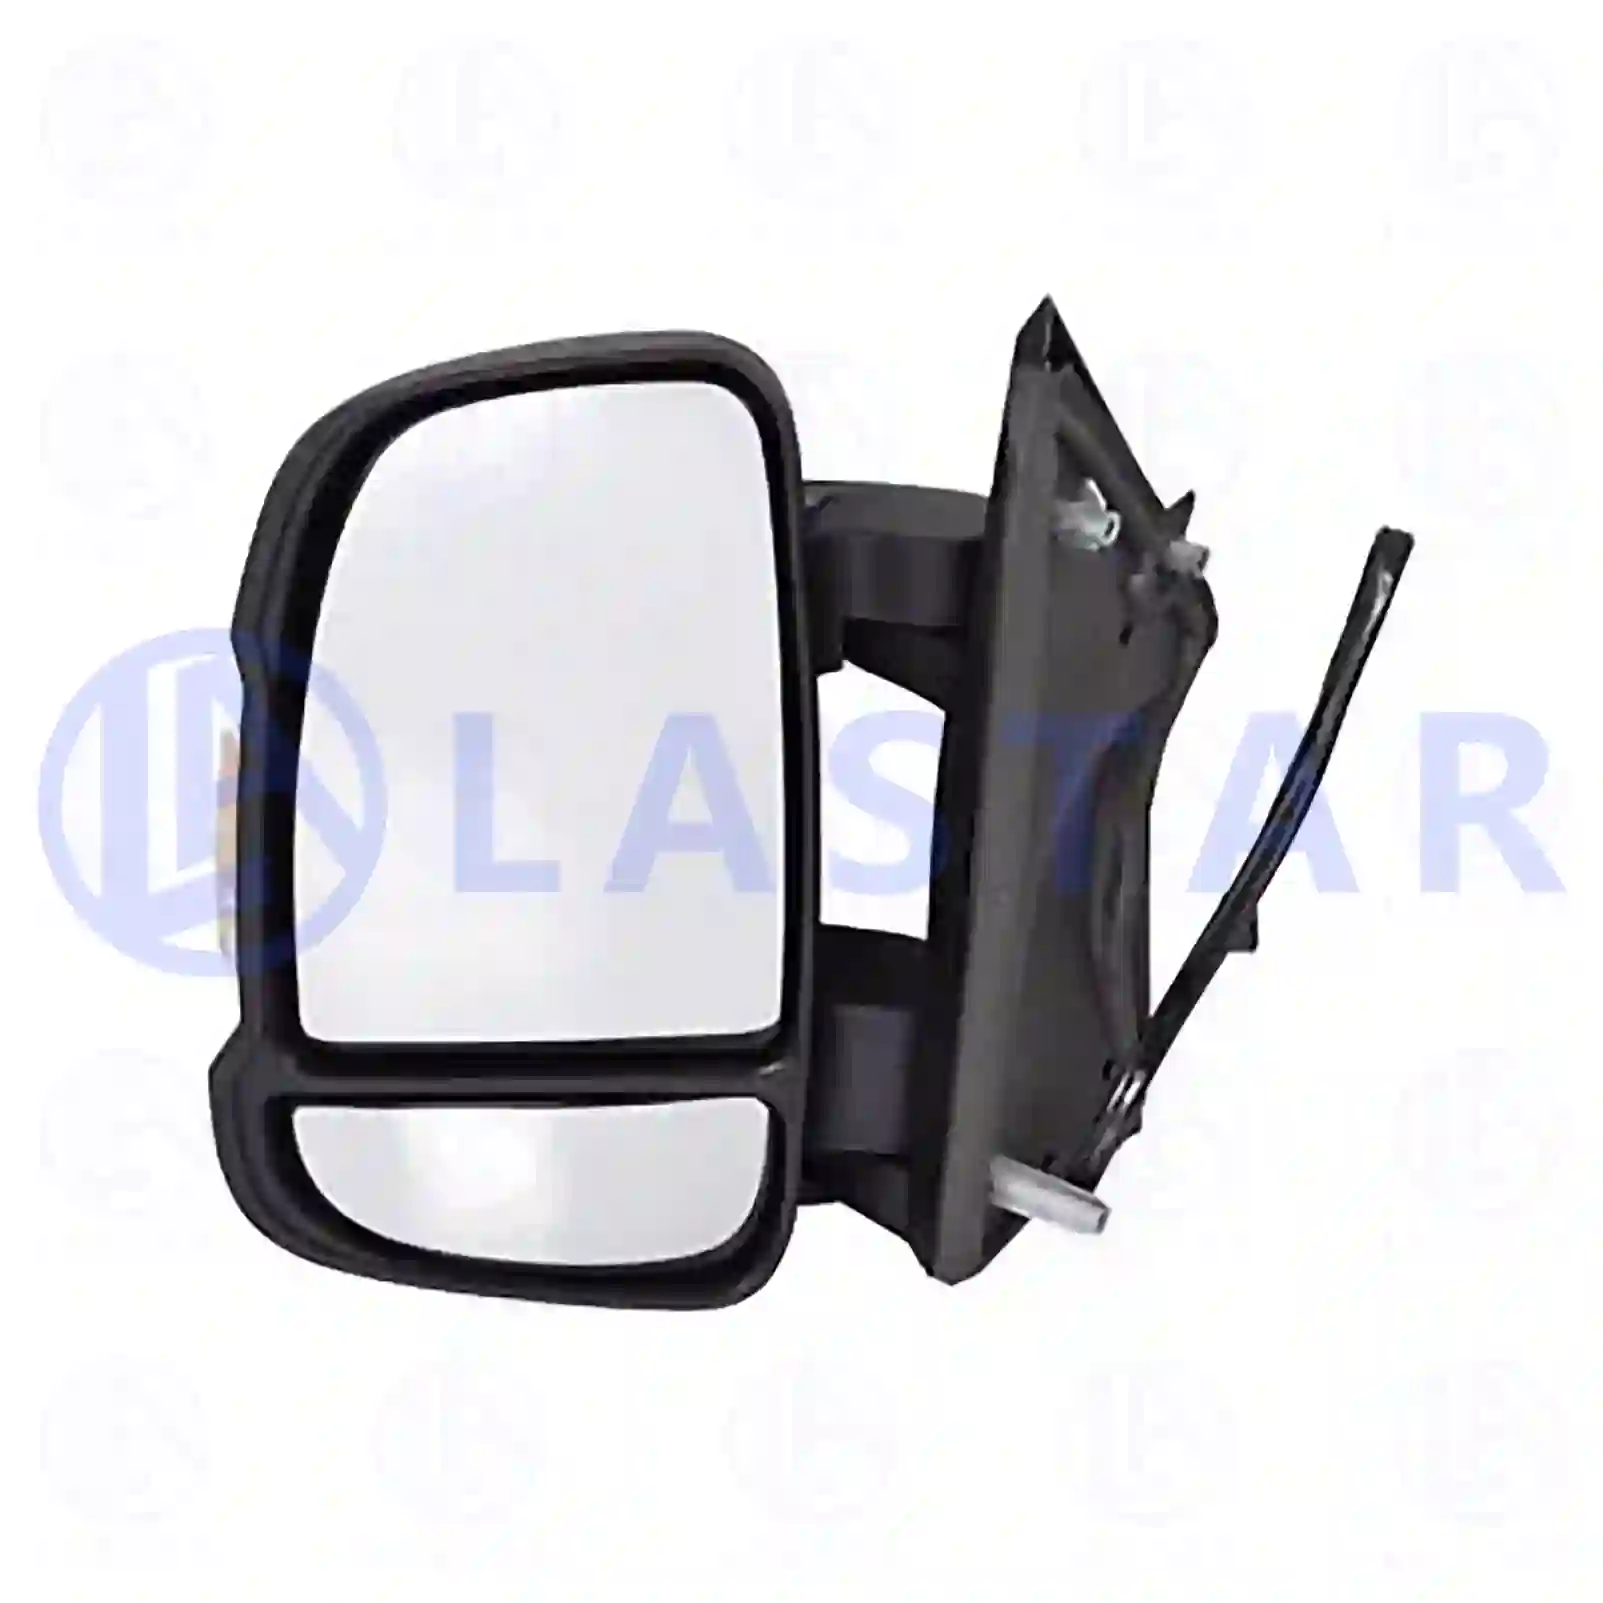 Main mirror, left, heated, electrical, 77718054, 1613692580, 8153Y8, 815423, 8154LX, 1306562070, 735424423, 735480934, 735517073, 735620748, 71778675, 1613692580, 8153Y8, 815423, 8154LX ||  77718054 Lastar Spare Part | Truck Spare Parts, Auotomotive Spare Parts Main mirror, left, heated, electrical, 77718054, 1613692580, 8153Y8, 815423, 8154LX, 1306562070, 735424423, 735480934, 735517073, 735620748, 71778675, 1613692580, 8153Y8, 815423, 8154LX ||  77718054 Lastar Spare Part | Truck Spare Parts, Auotomotive Spare Parts